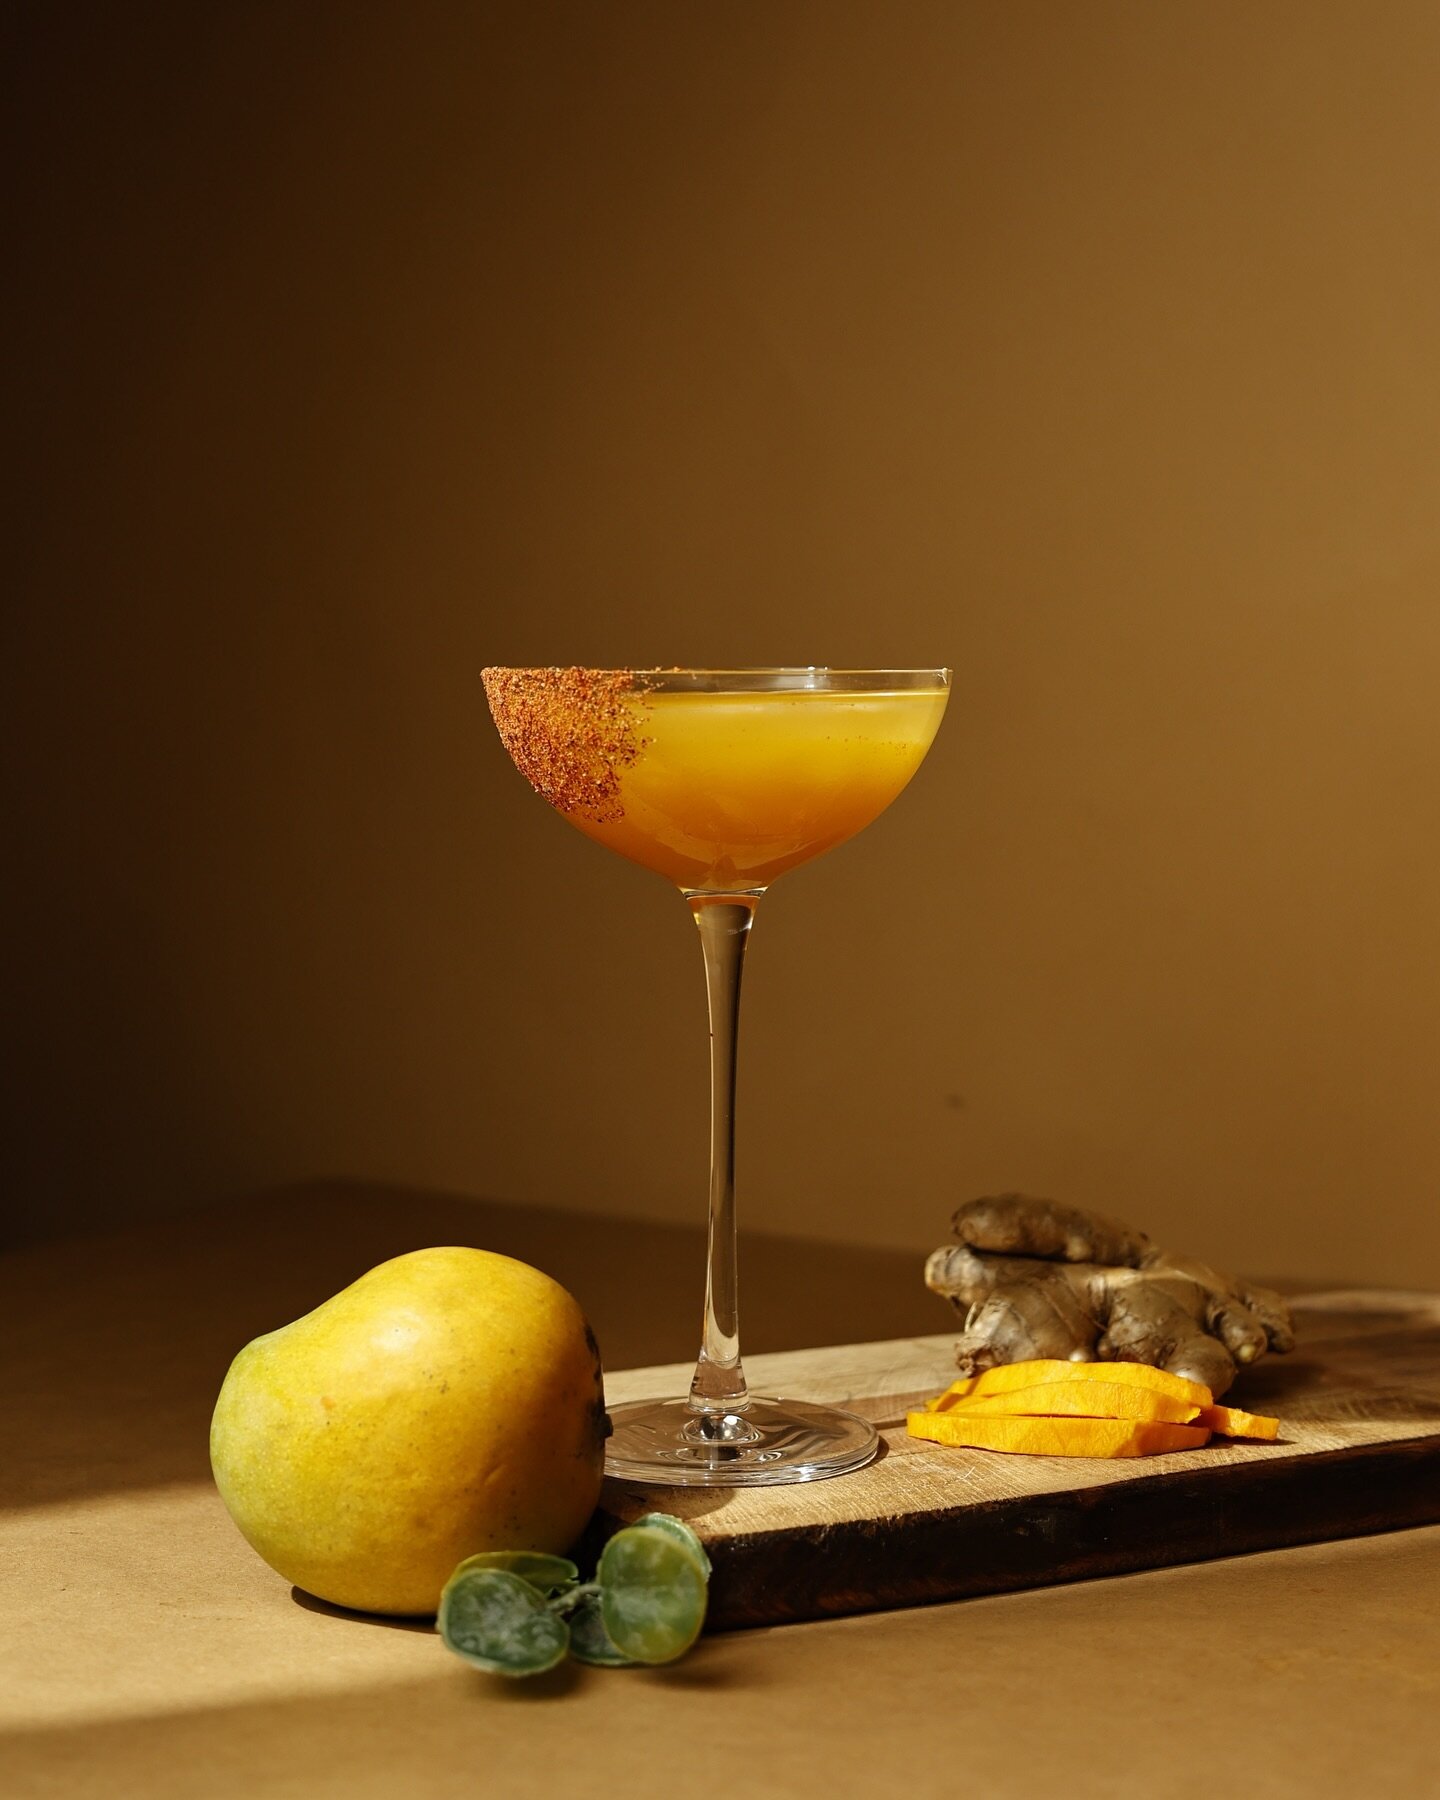 The Mango Ginger Margarita - the perfect harmony of sweet mango and fiery ginger. 

RECIPE:
40ml Tequila Blanco 
20ml Kaveri
20ml Fresh Lime Juice 
20ml Mango Pulp* 

Rim either a martini glass/coupe or a rocks glass with a salt/chaat masala mix. If 